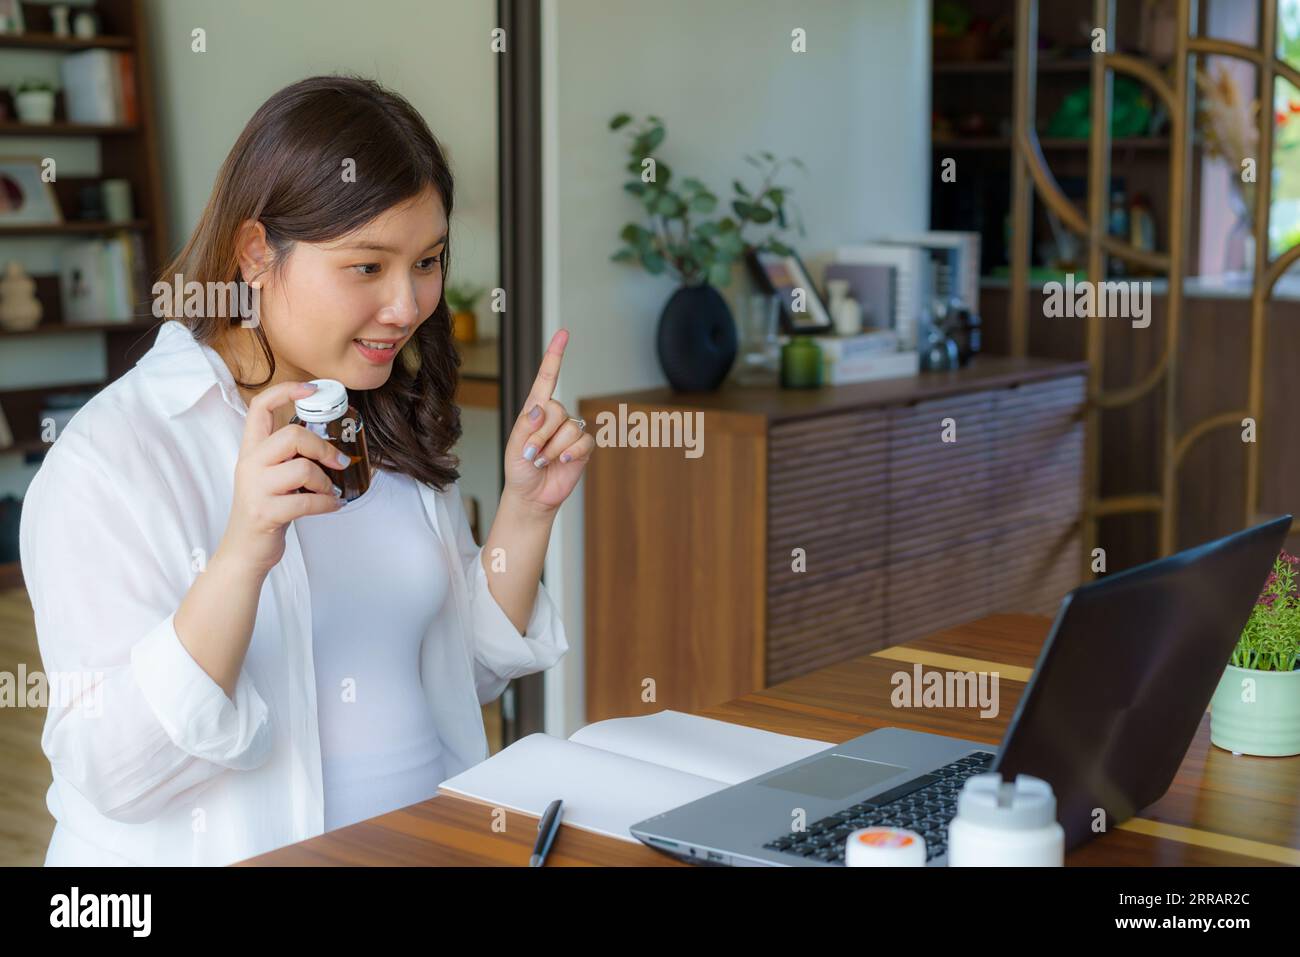 From home's comfort, an Asian pregnant woman consults her doctor through the digital realm. A pill bottle holds hope as virtual care bridges distances Stock Photo